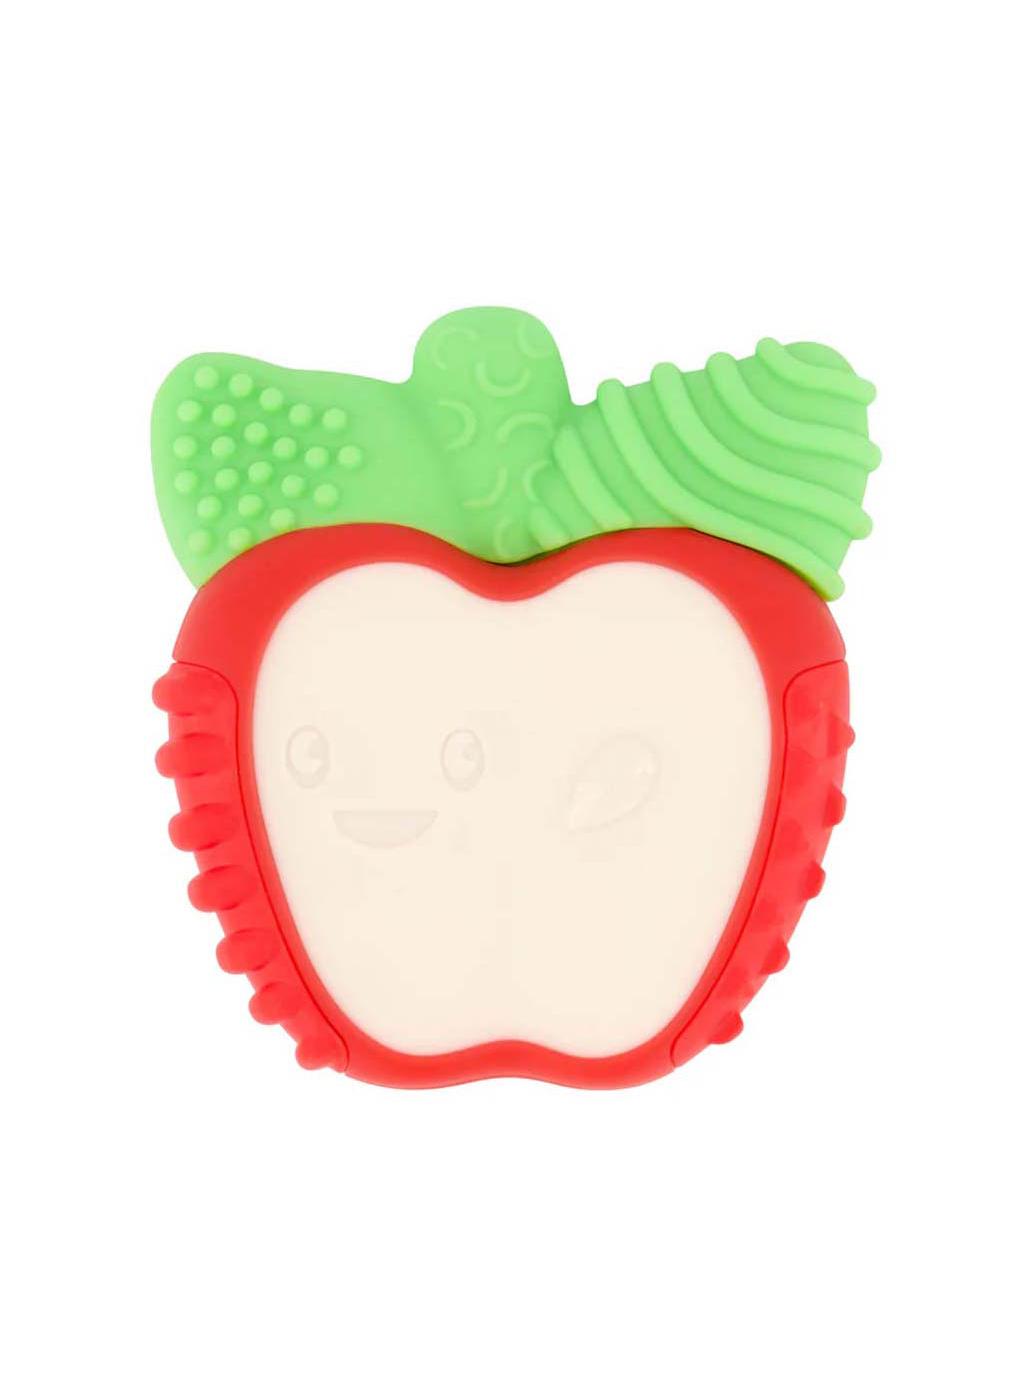 Infantino Lil' Nibblers Vibrating Apple Teether; image 1 of 2